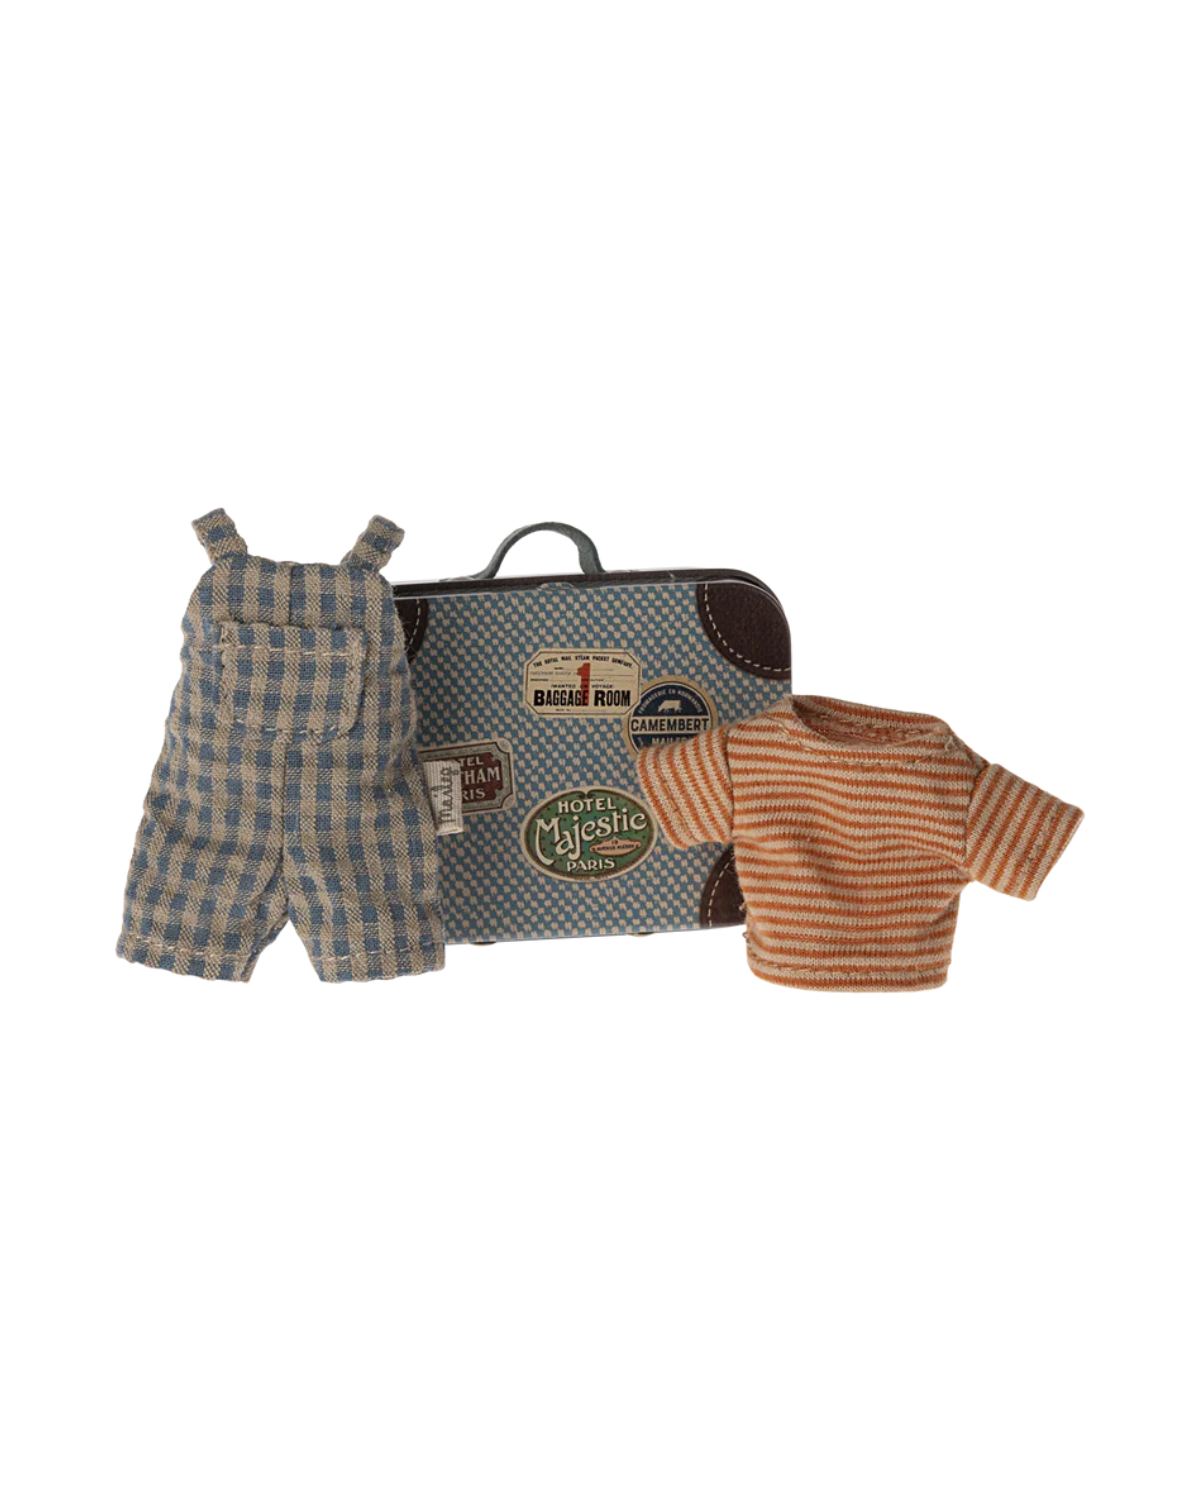 Dress up your big brother mouse in style with the Maileg Overalls & Shirt set, neatly packed in a convenient suitcase for dollhouse play